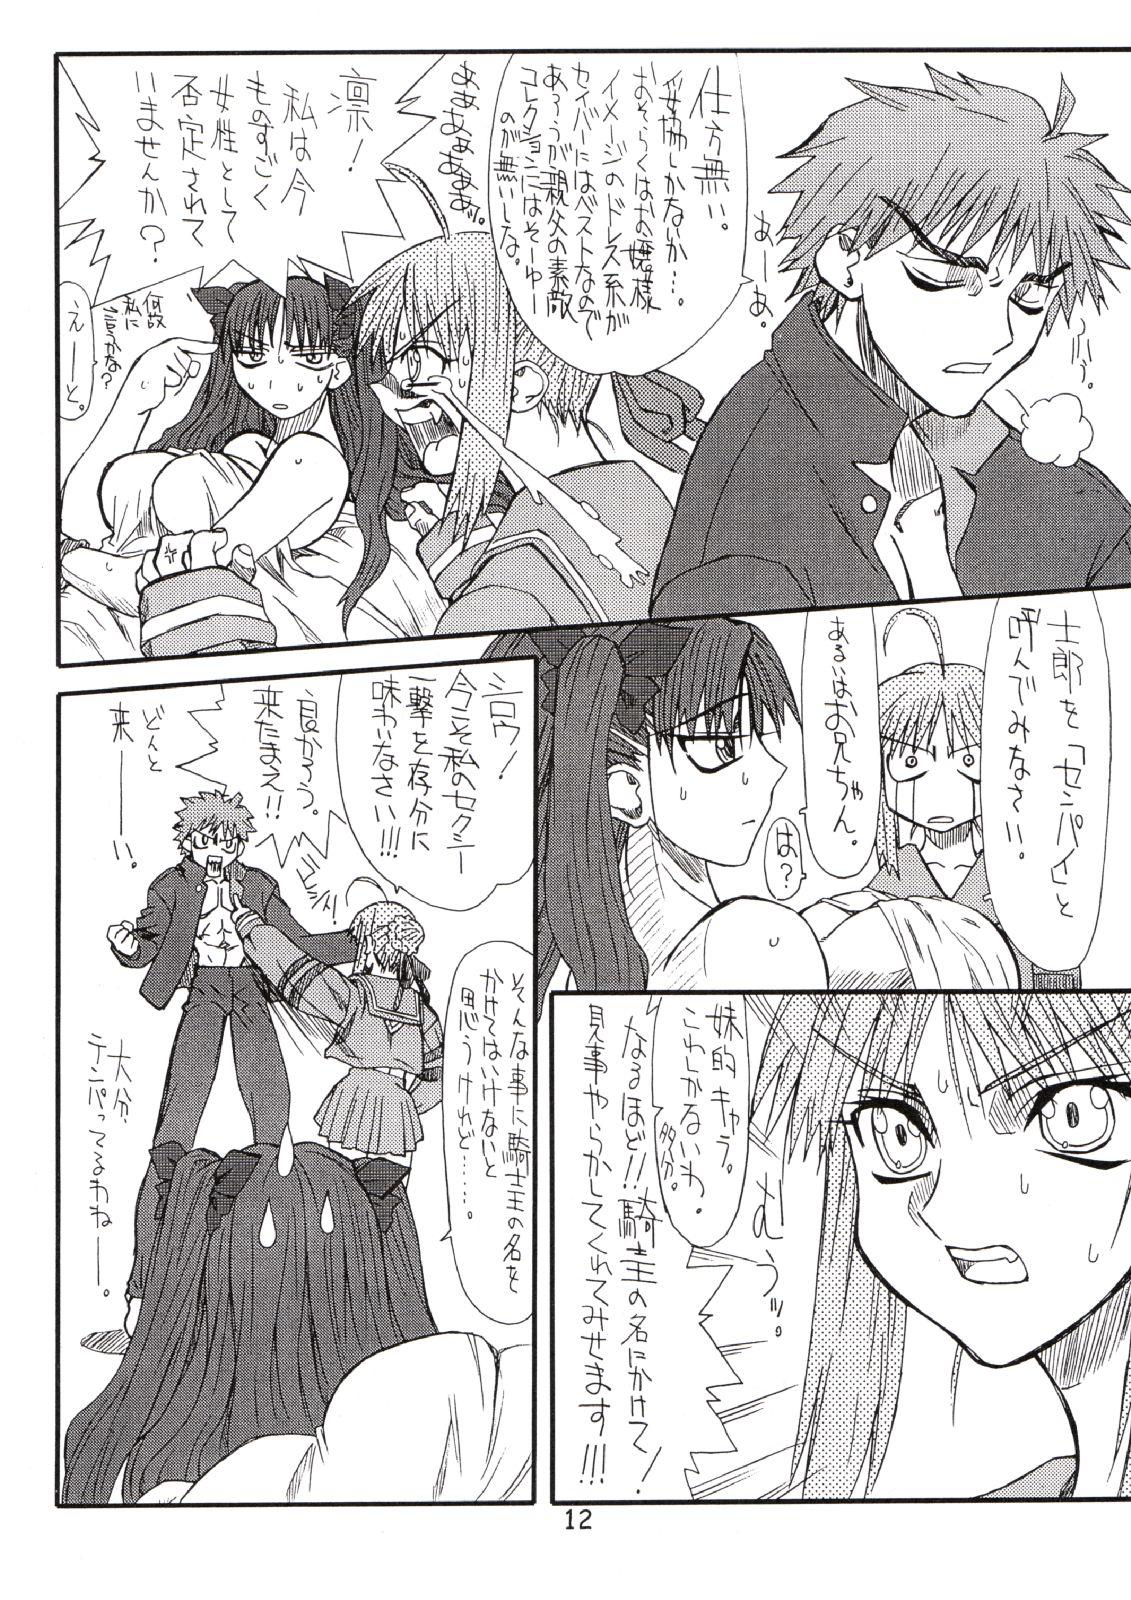 Transex Corn 2 - Fate stay night Strap On - Page 11